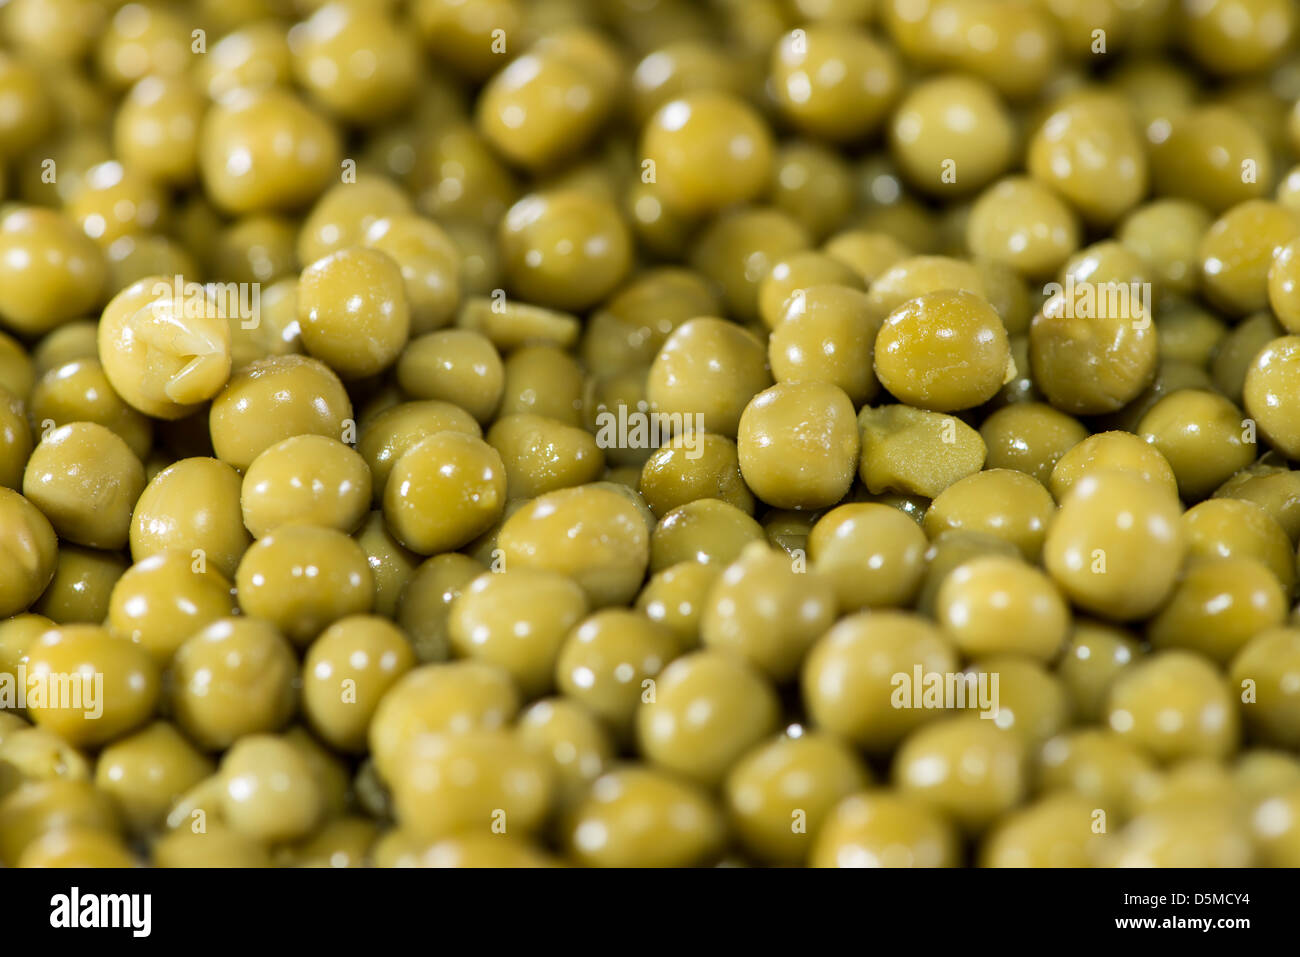 Canned Peas as fullscreen background picture Stock Photo